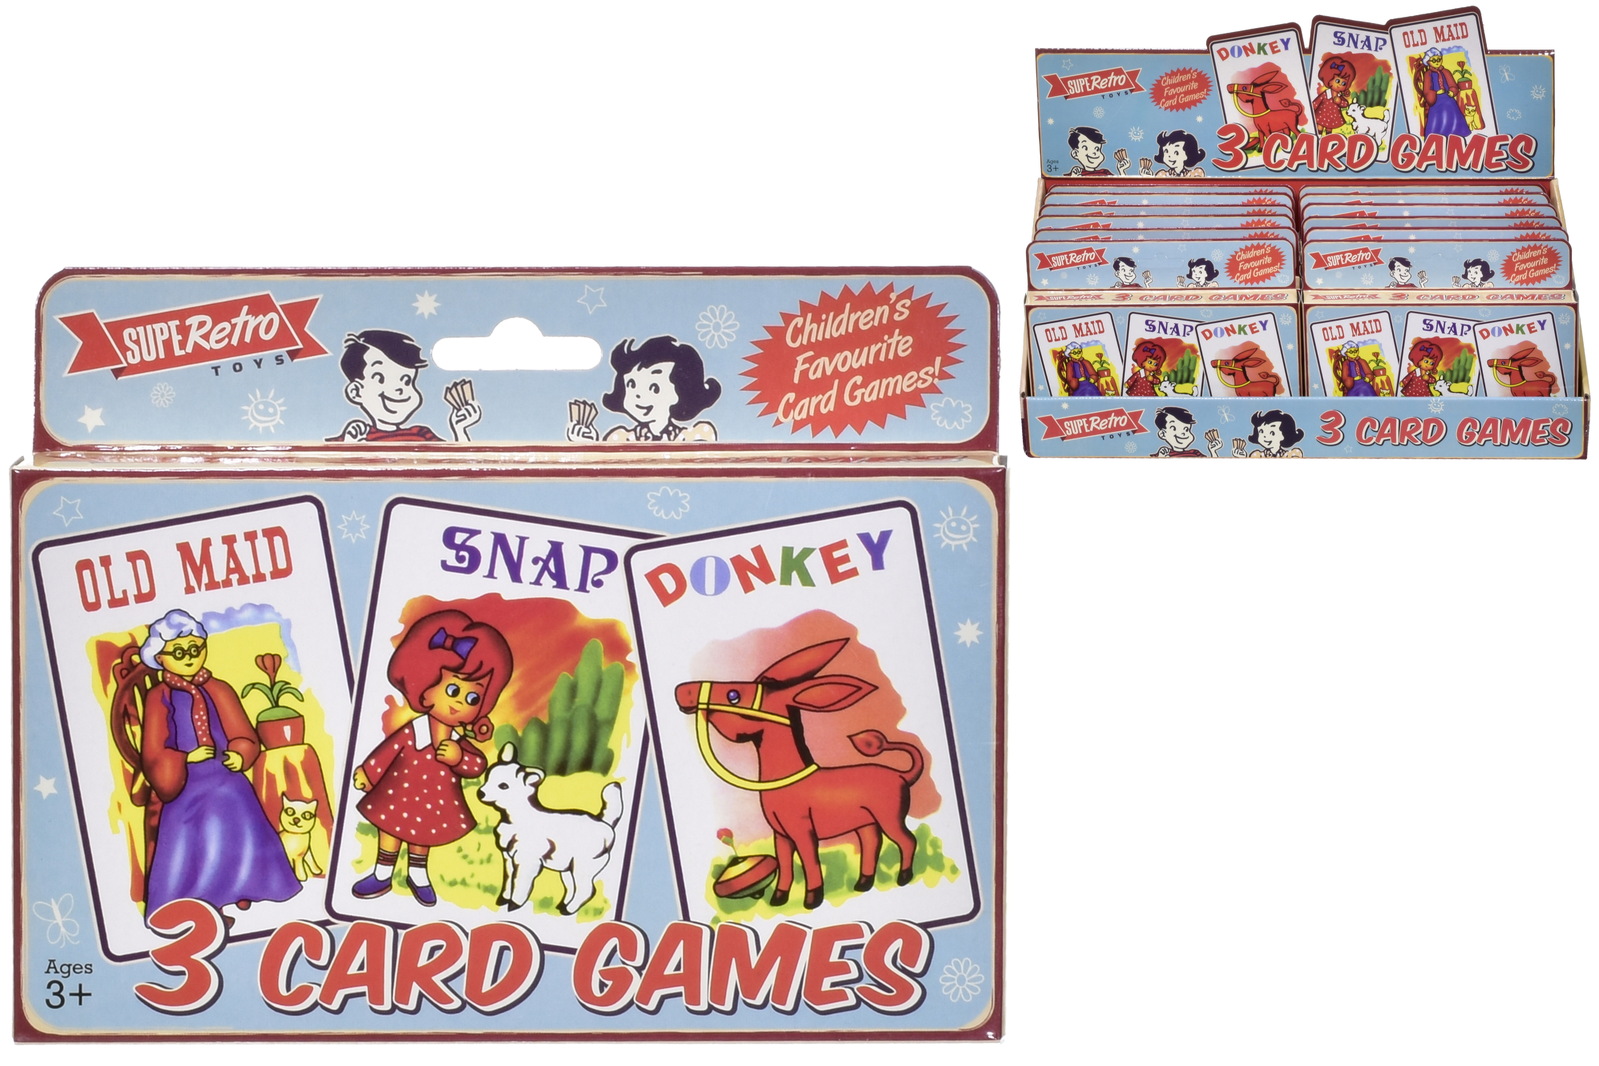 KIDS CARD GAMES 4 DIFFERENT CARDS SNAP OLD MAID& ANIMALS SNAP KIDS FUN DONKEY